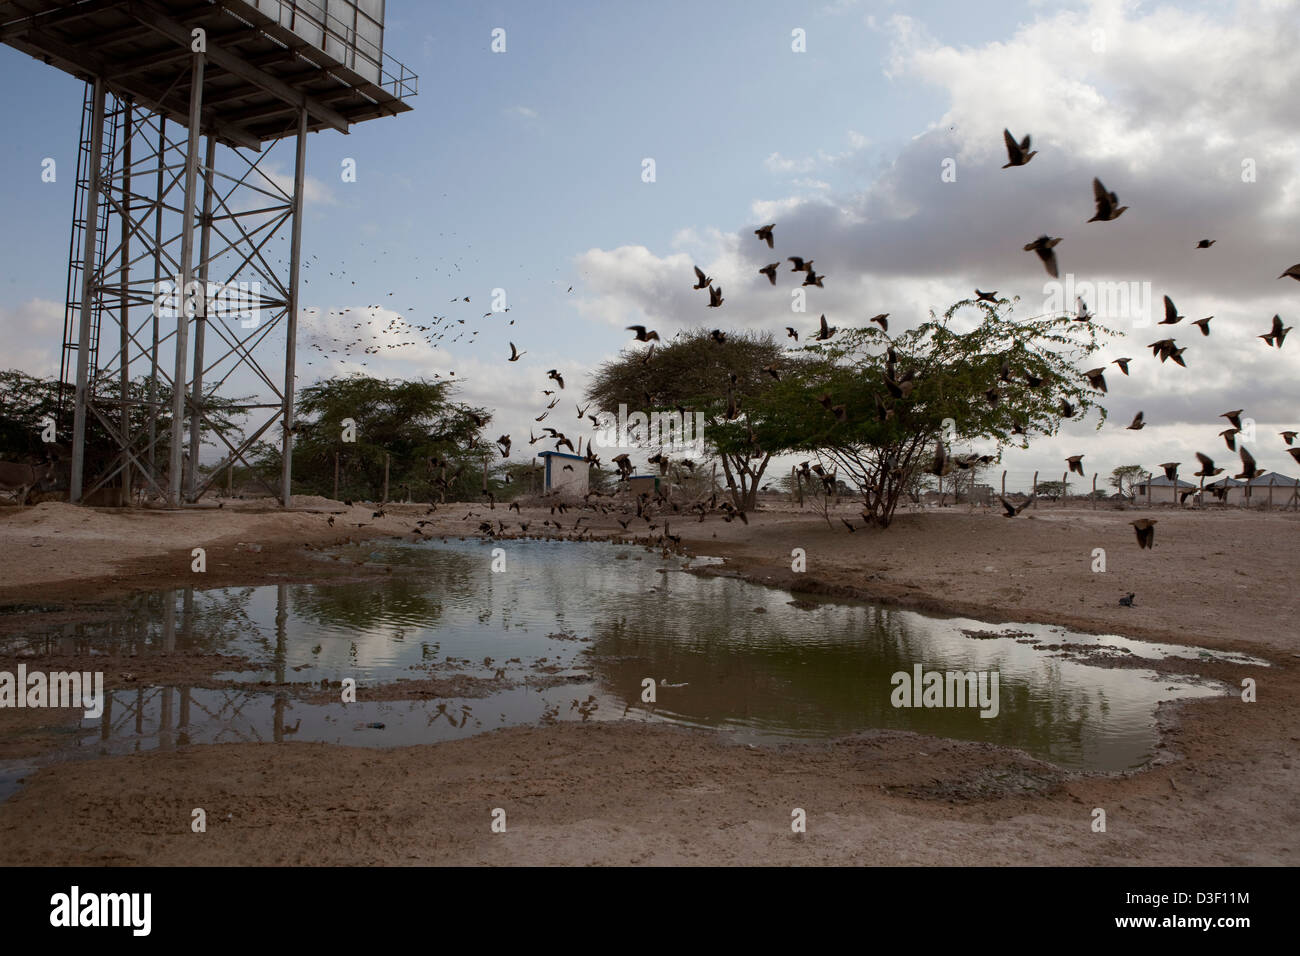 ELWAK, EASTERN KENYA, 1st SEPTEMBER 2009: Birds fly in swarms to take a drink from a small pond formed by spillage Stock Photo